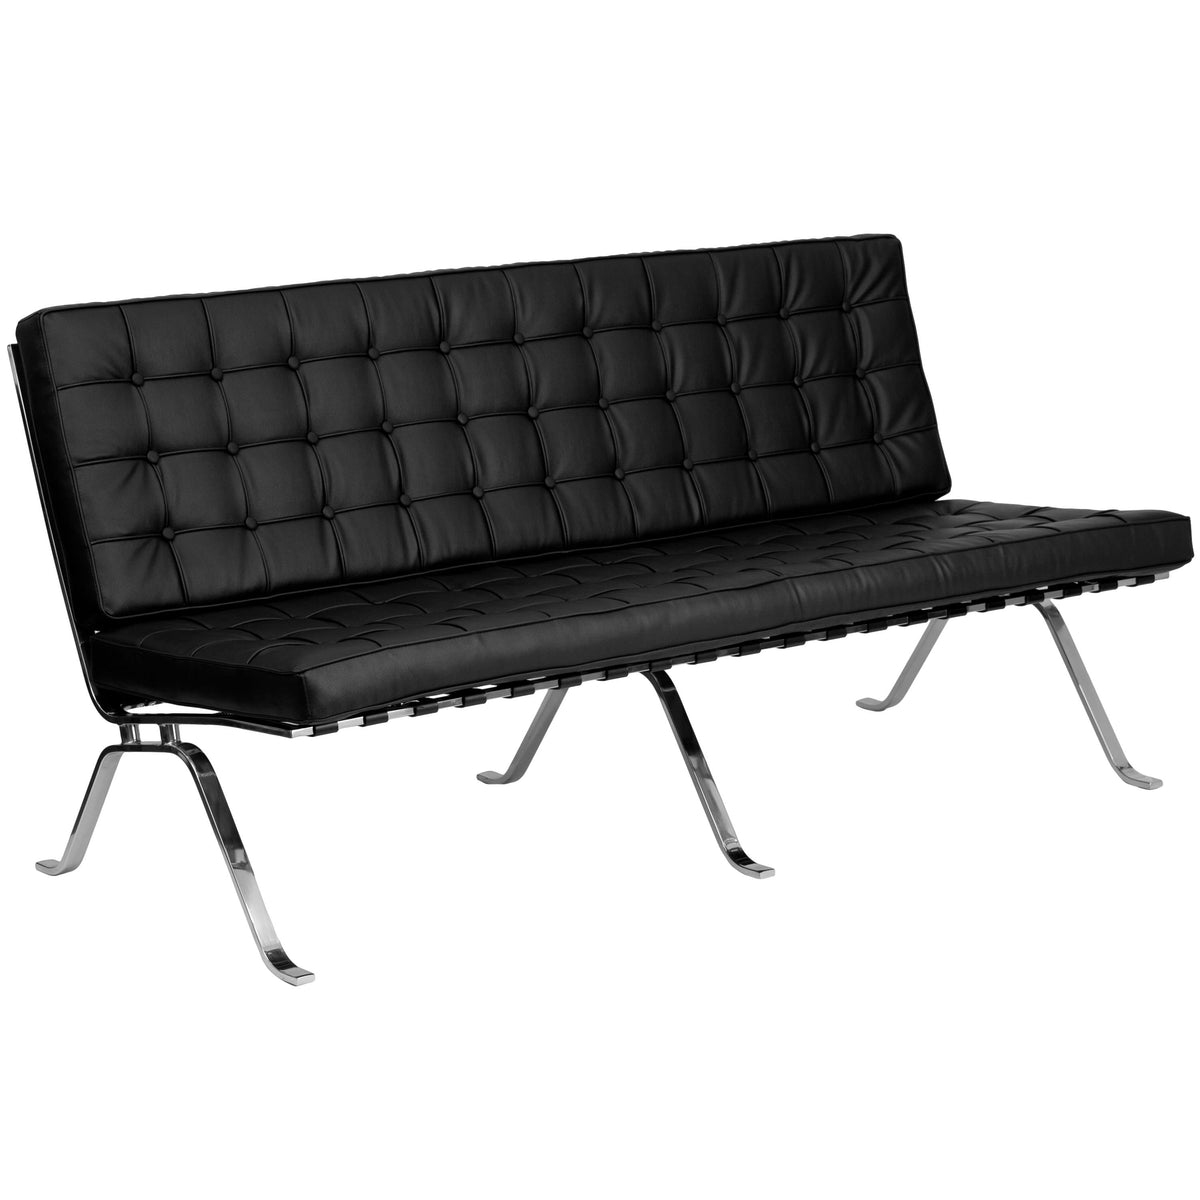 Black LeatherSoft Button Tufted Armless Sofa with Designer Curved Legs